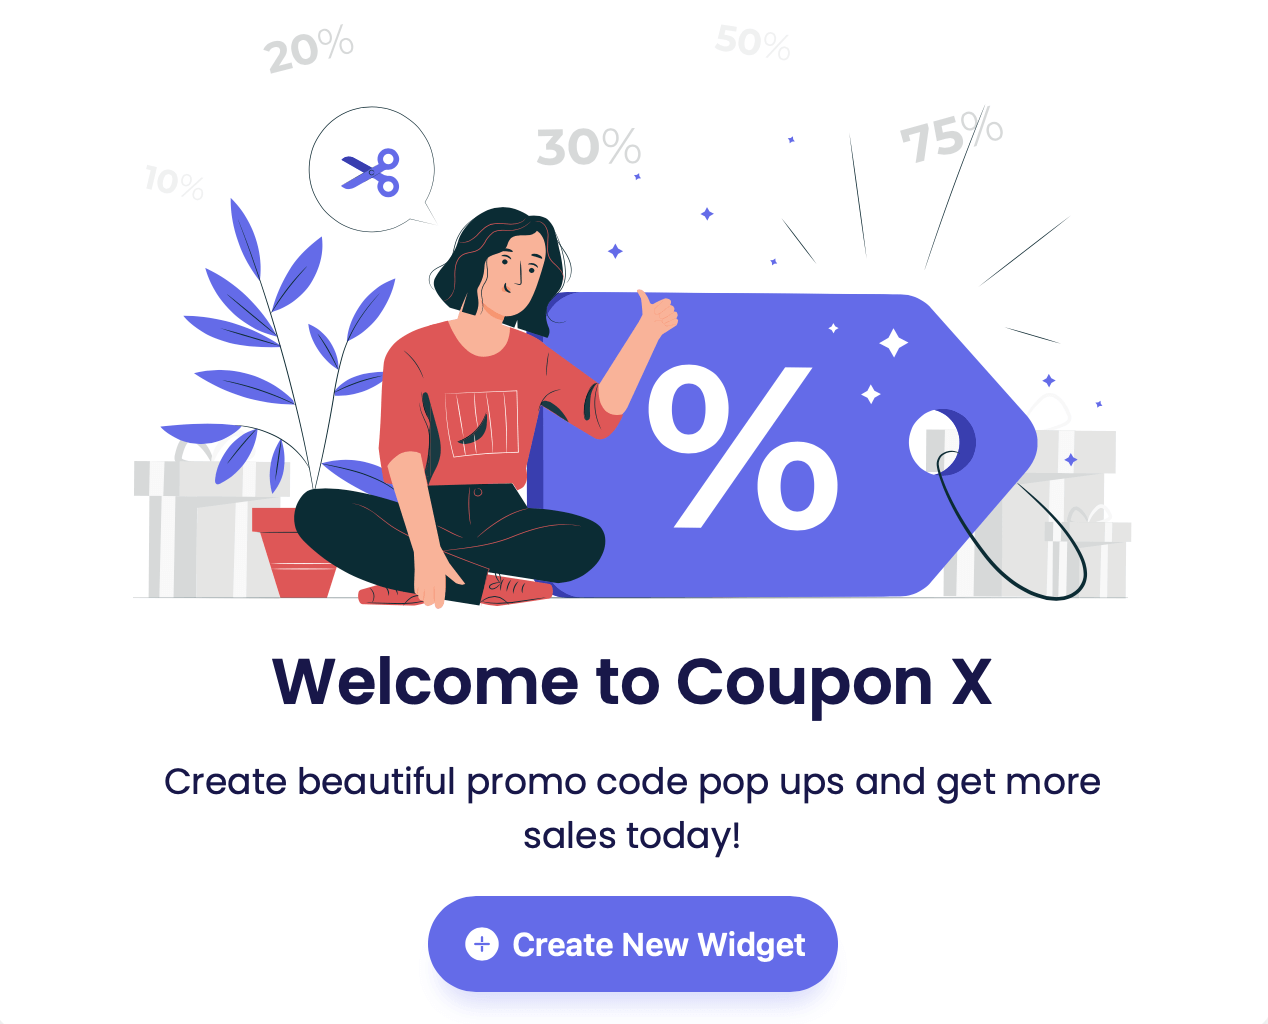 Use the Coupon Code